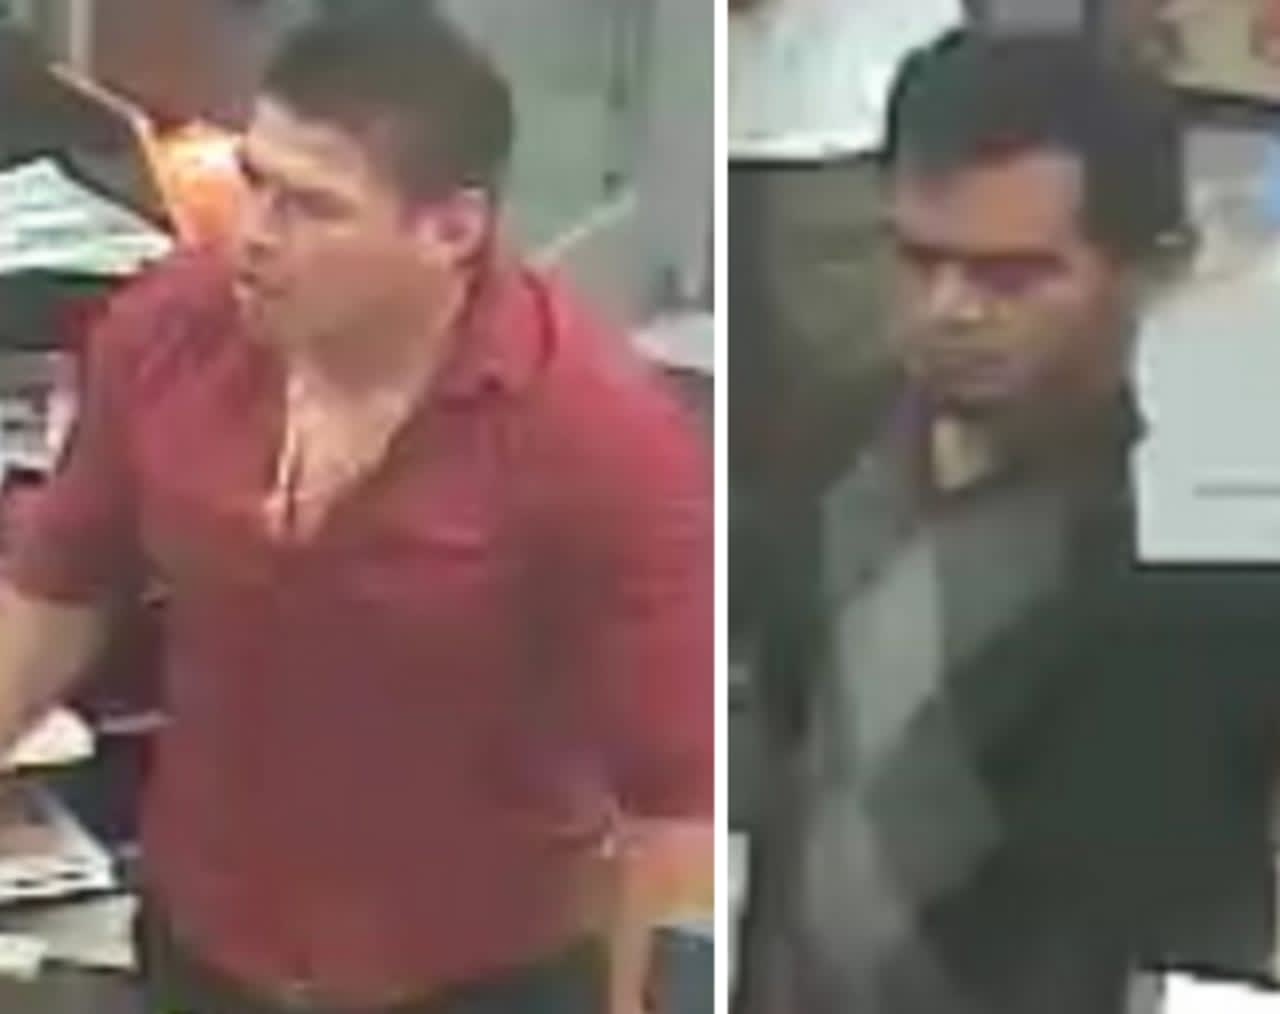 Police are on the lookout for two men suspected of knocking items off the counter at Sunoco in Hauppauge (360 Wheeler Road) on Saturday, Aug. 31 around 8:30 p.m.